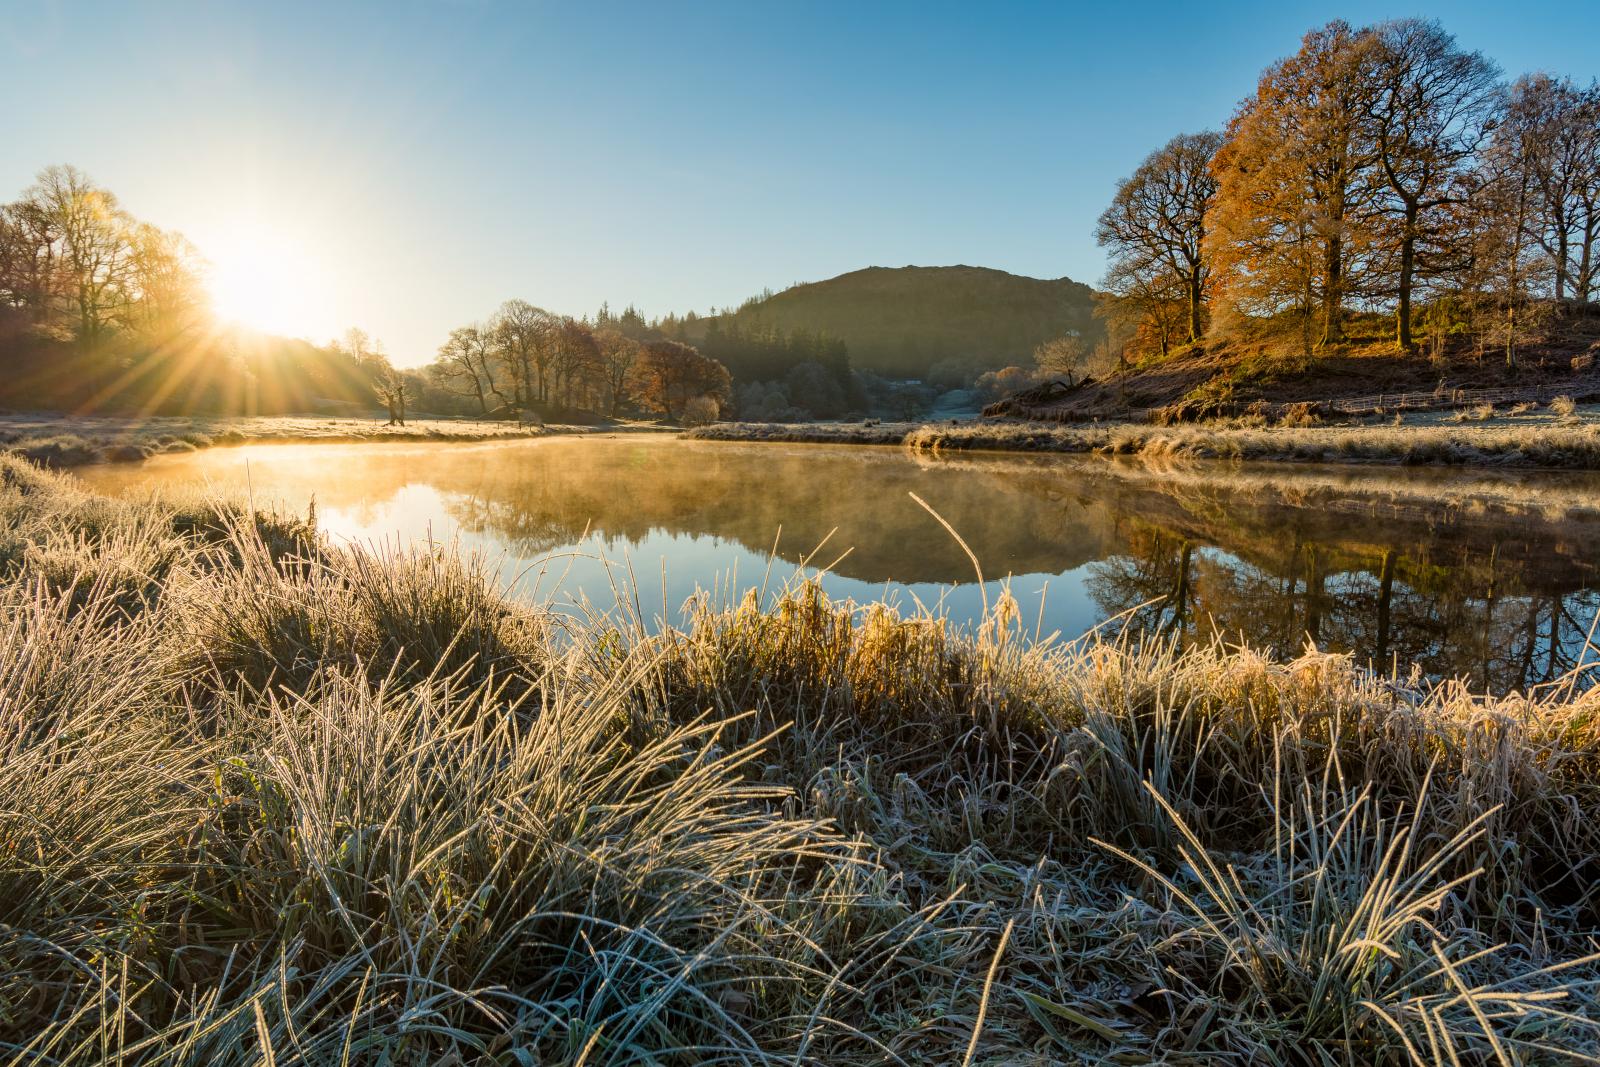 Frost returns as the UK's Warm October Takes a Colder Turn